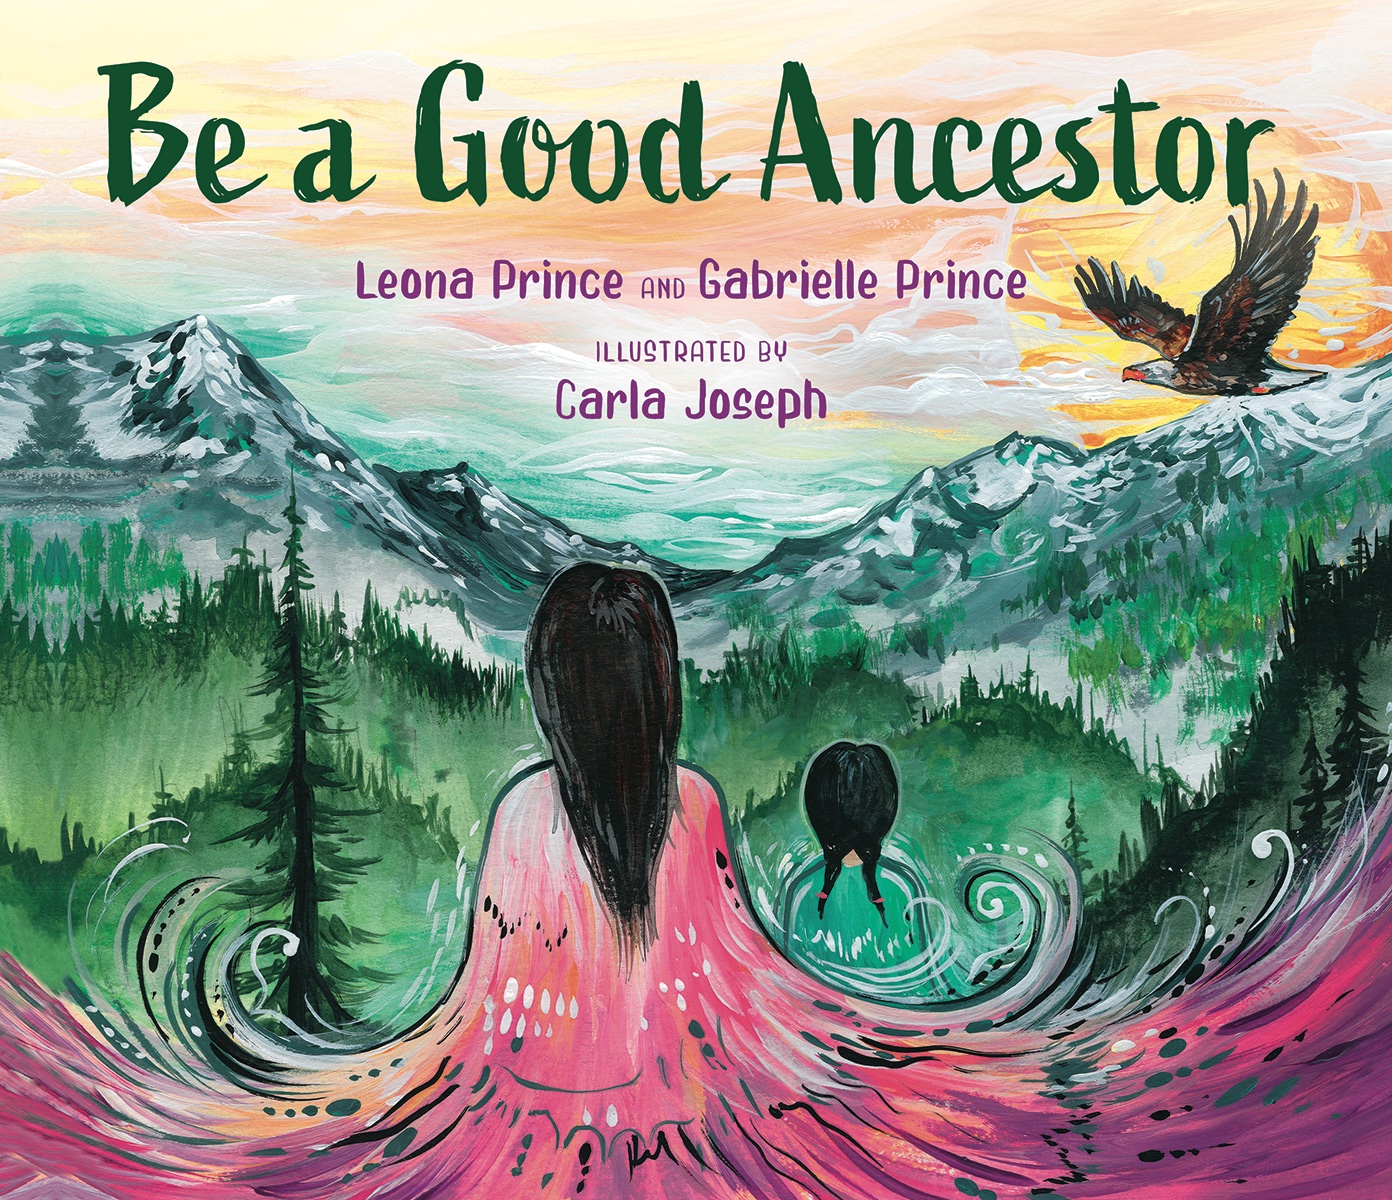 New picture book rooted in Indigenous teachings gently encourages readers to think of future generations